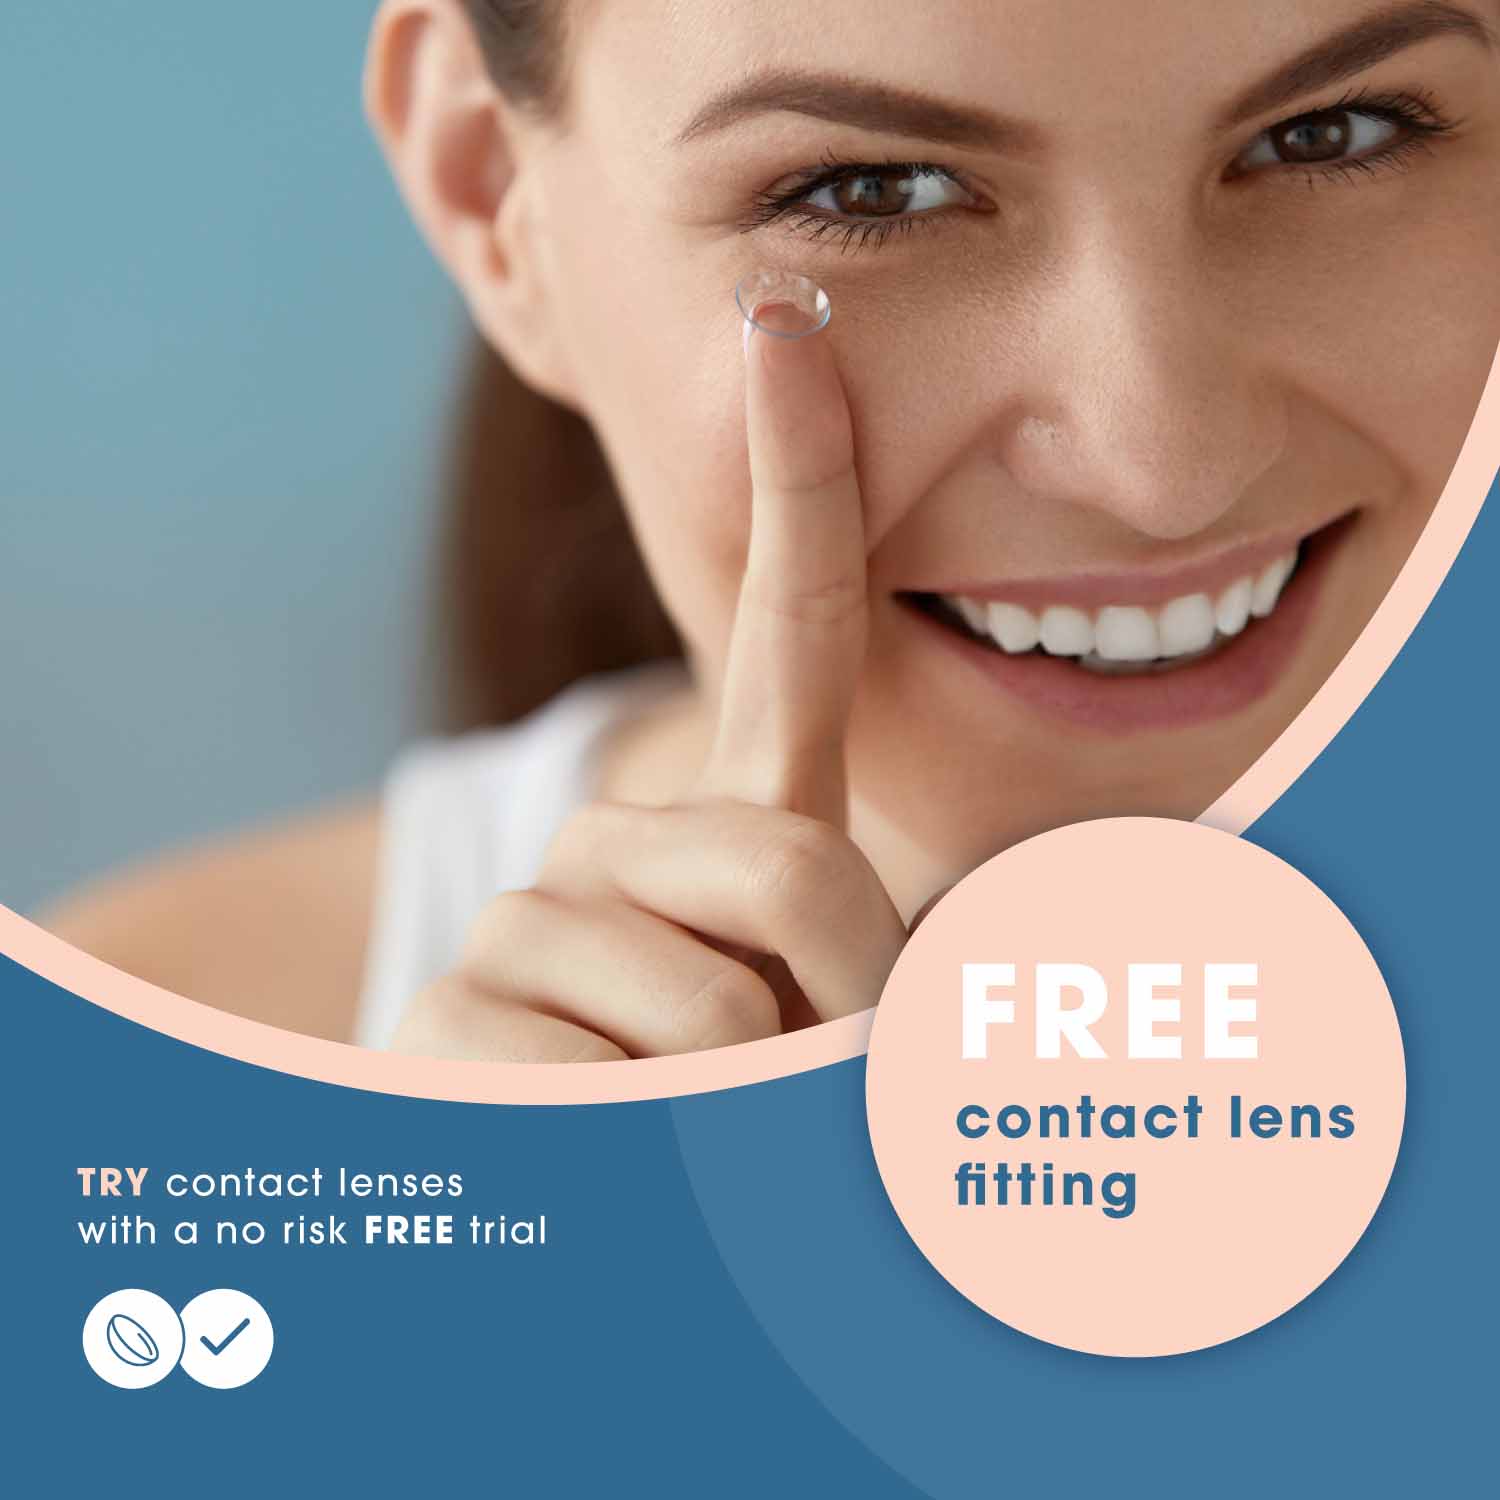  Contact Lenses - Free Trial